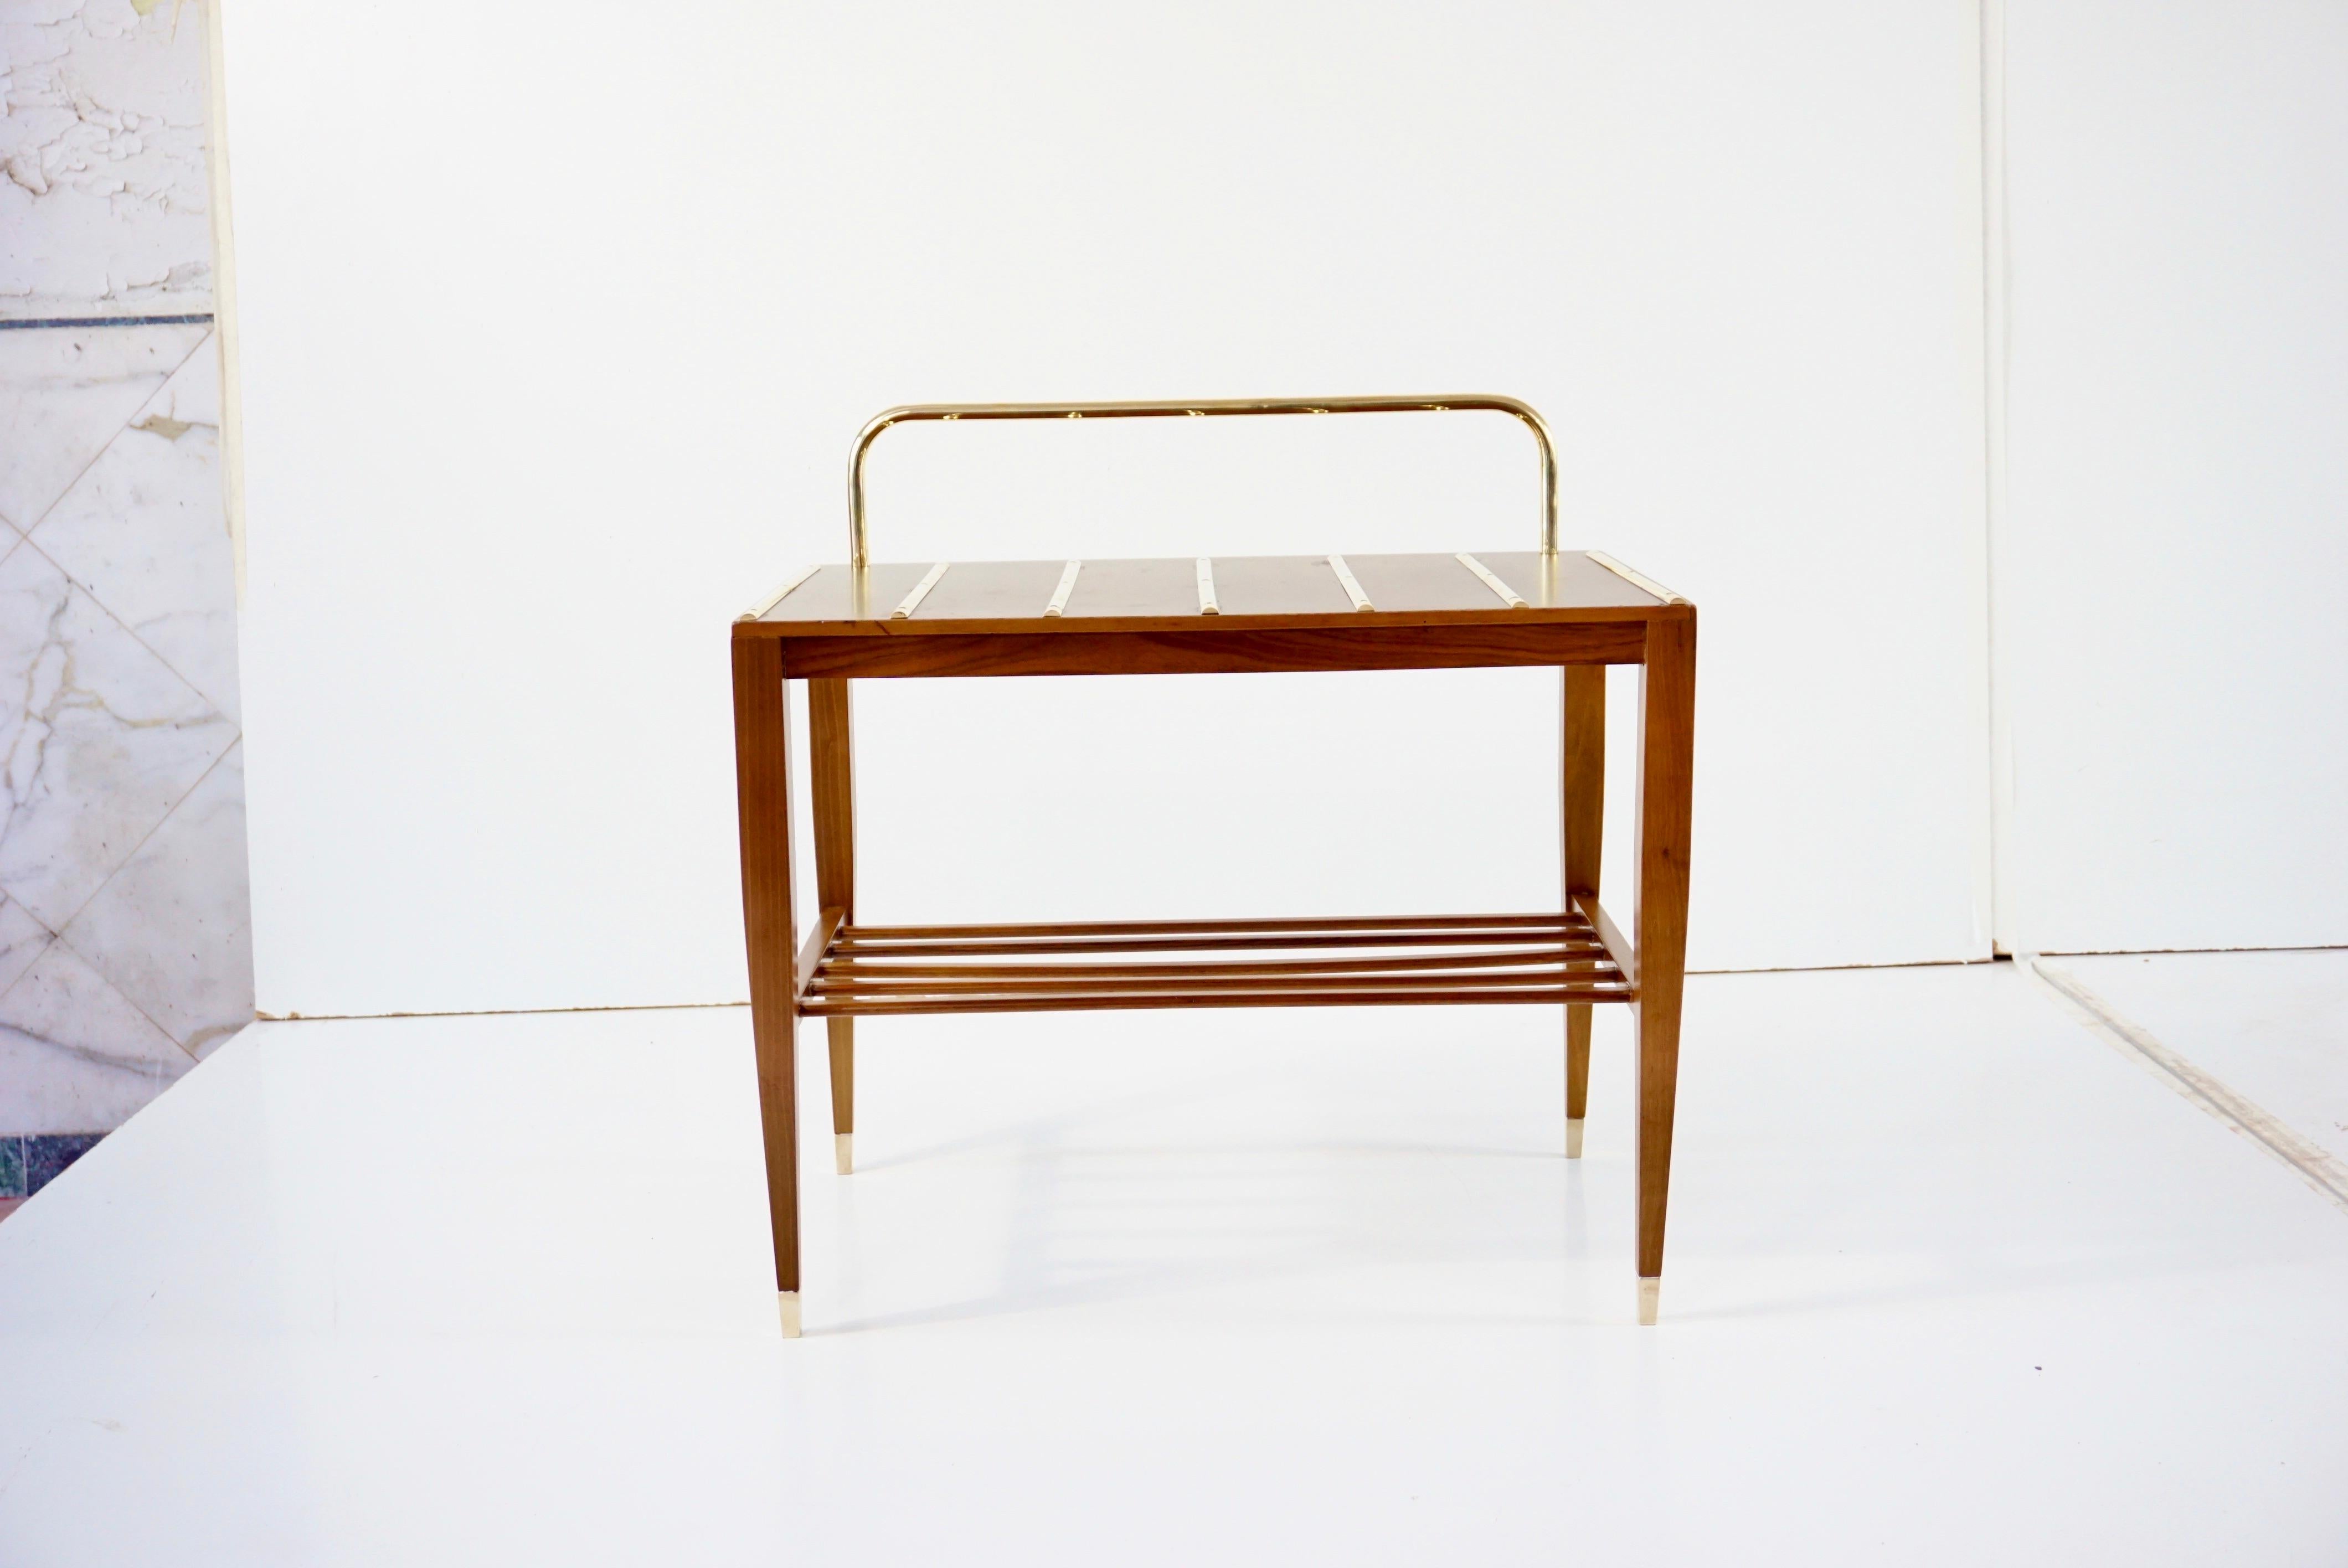 Gio Ponti side table (stand) produced by Giordano Chiesa, from the suite of the Hotel Royal Naples, 1955
Italian walnut, brass. Brass details: Handles, foot and seven sections 
five walnut sticks
Measures: Height 64 cm, 65 x 42 cm; height without